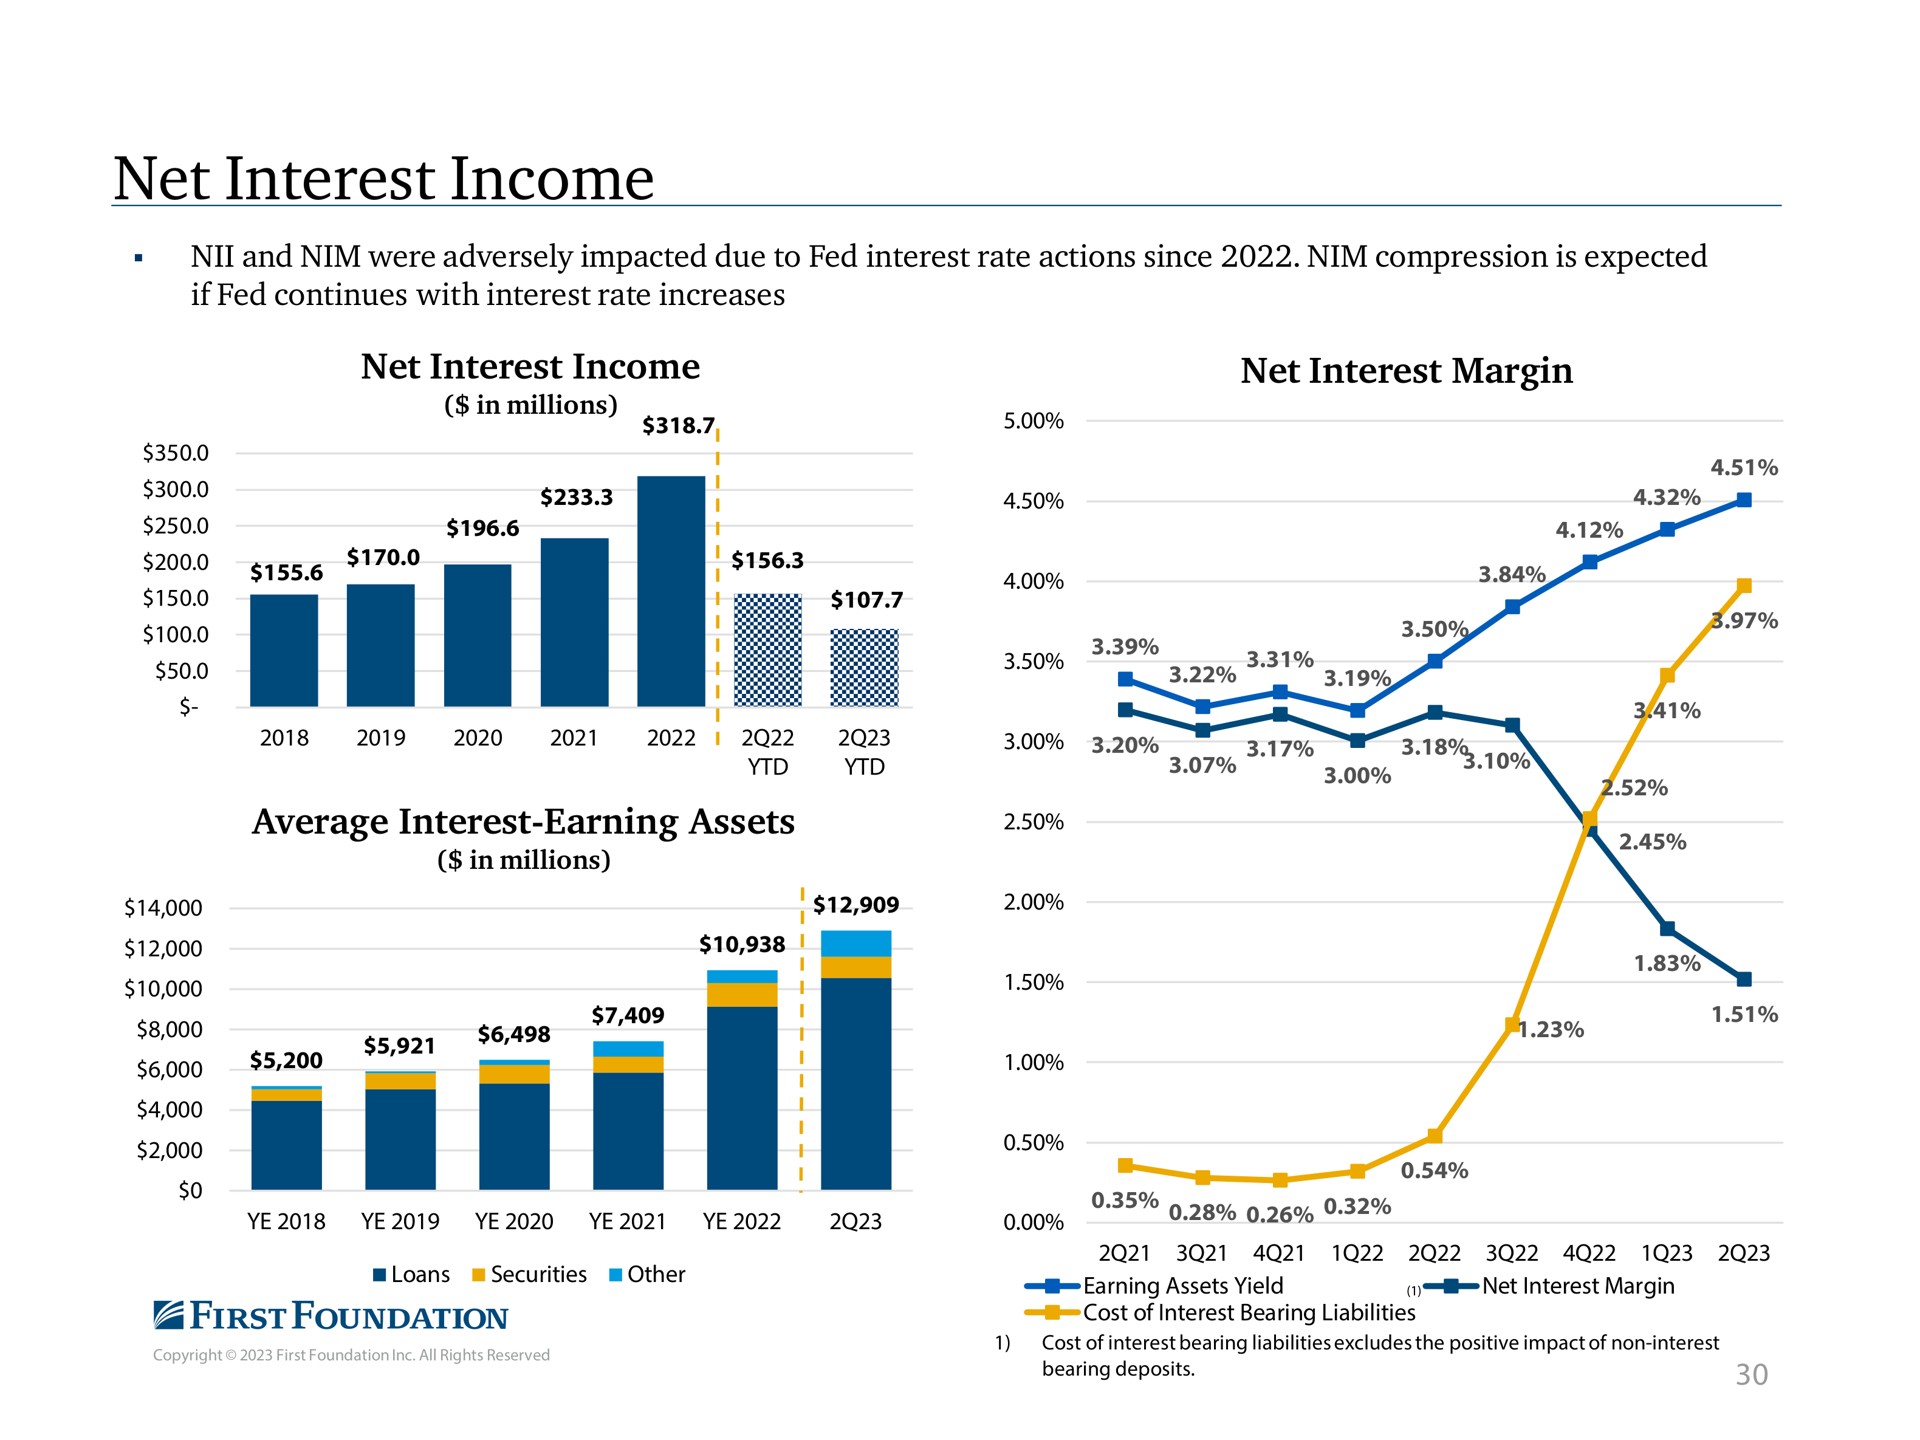 net interest income net interest income net interest margin average interest earning assets a a | First Foundation